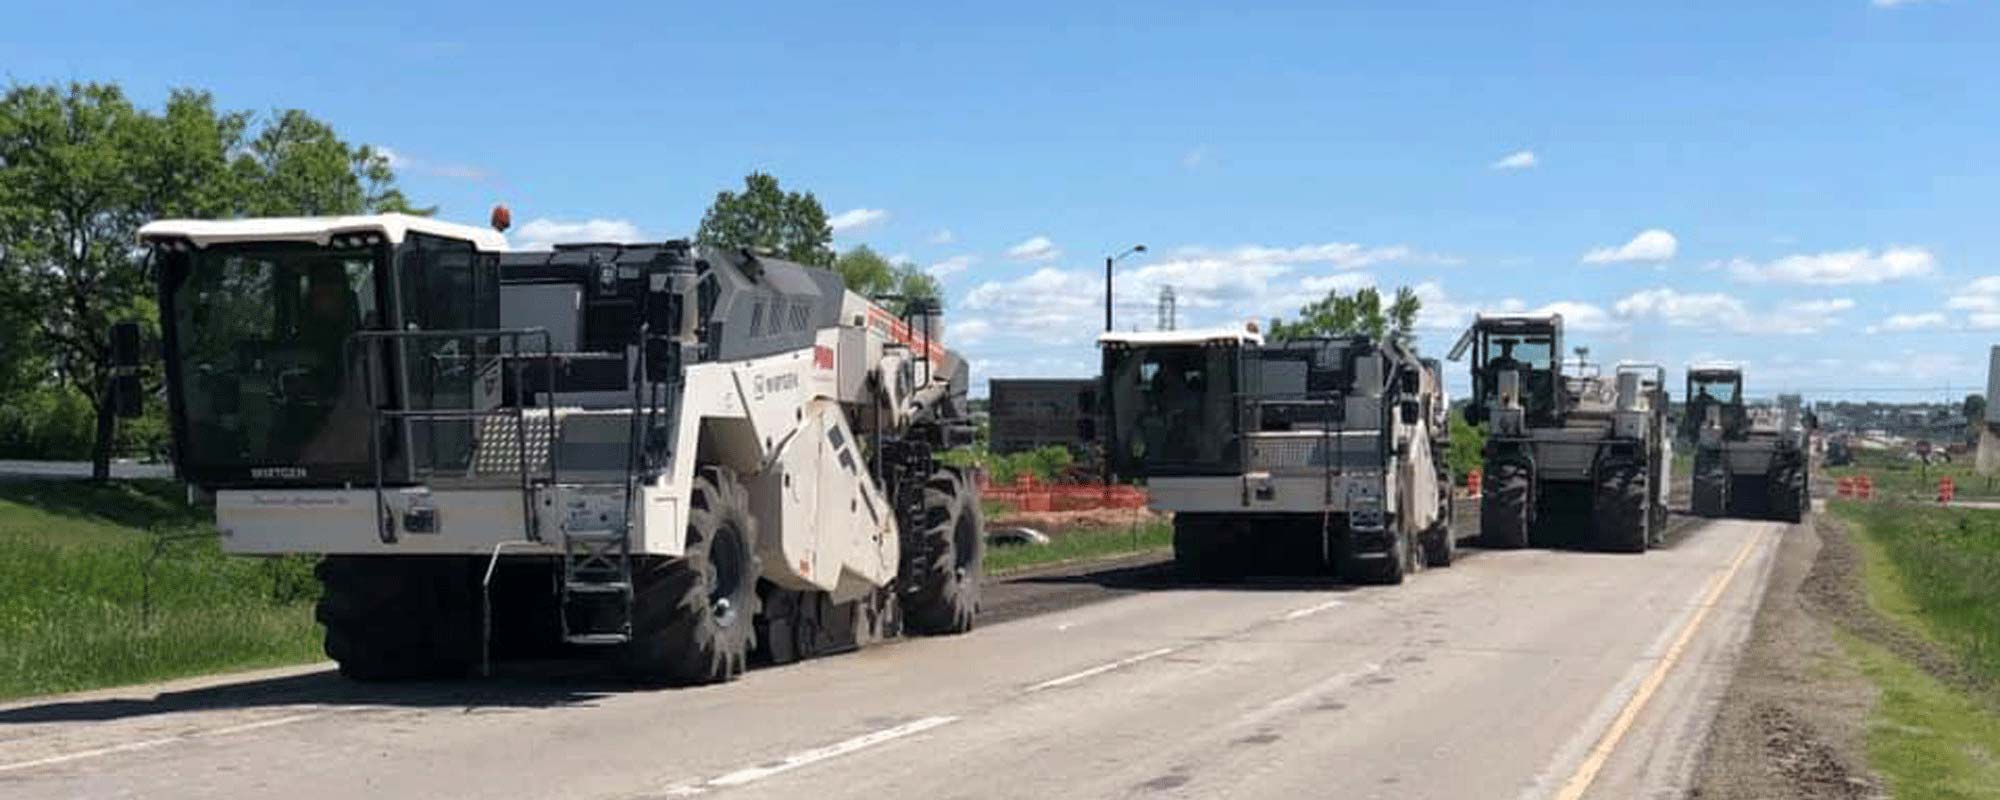 A fleet of milling and pulverizing equipment working on a road